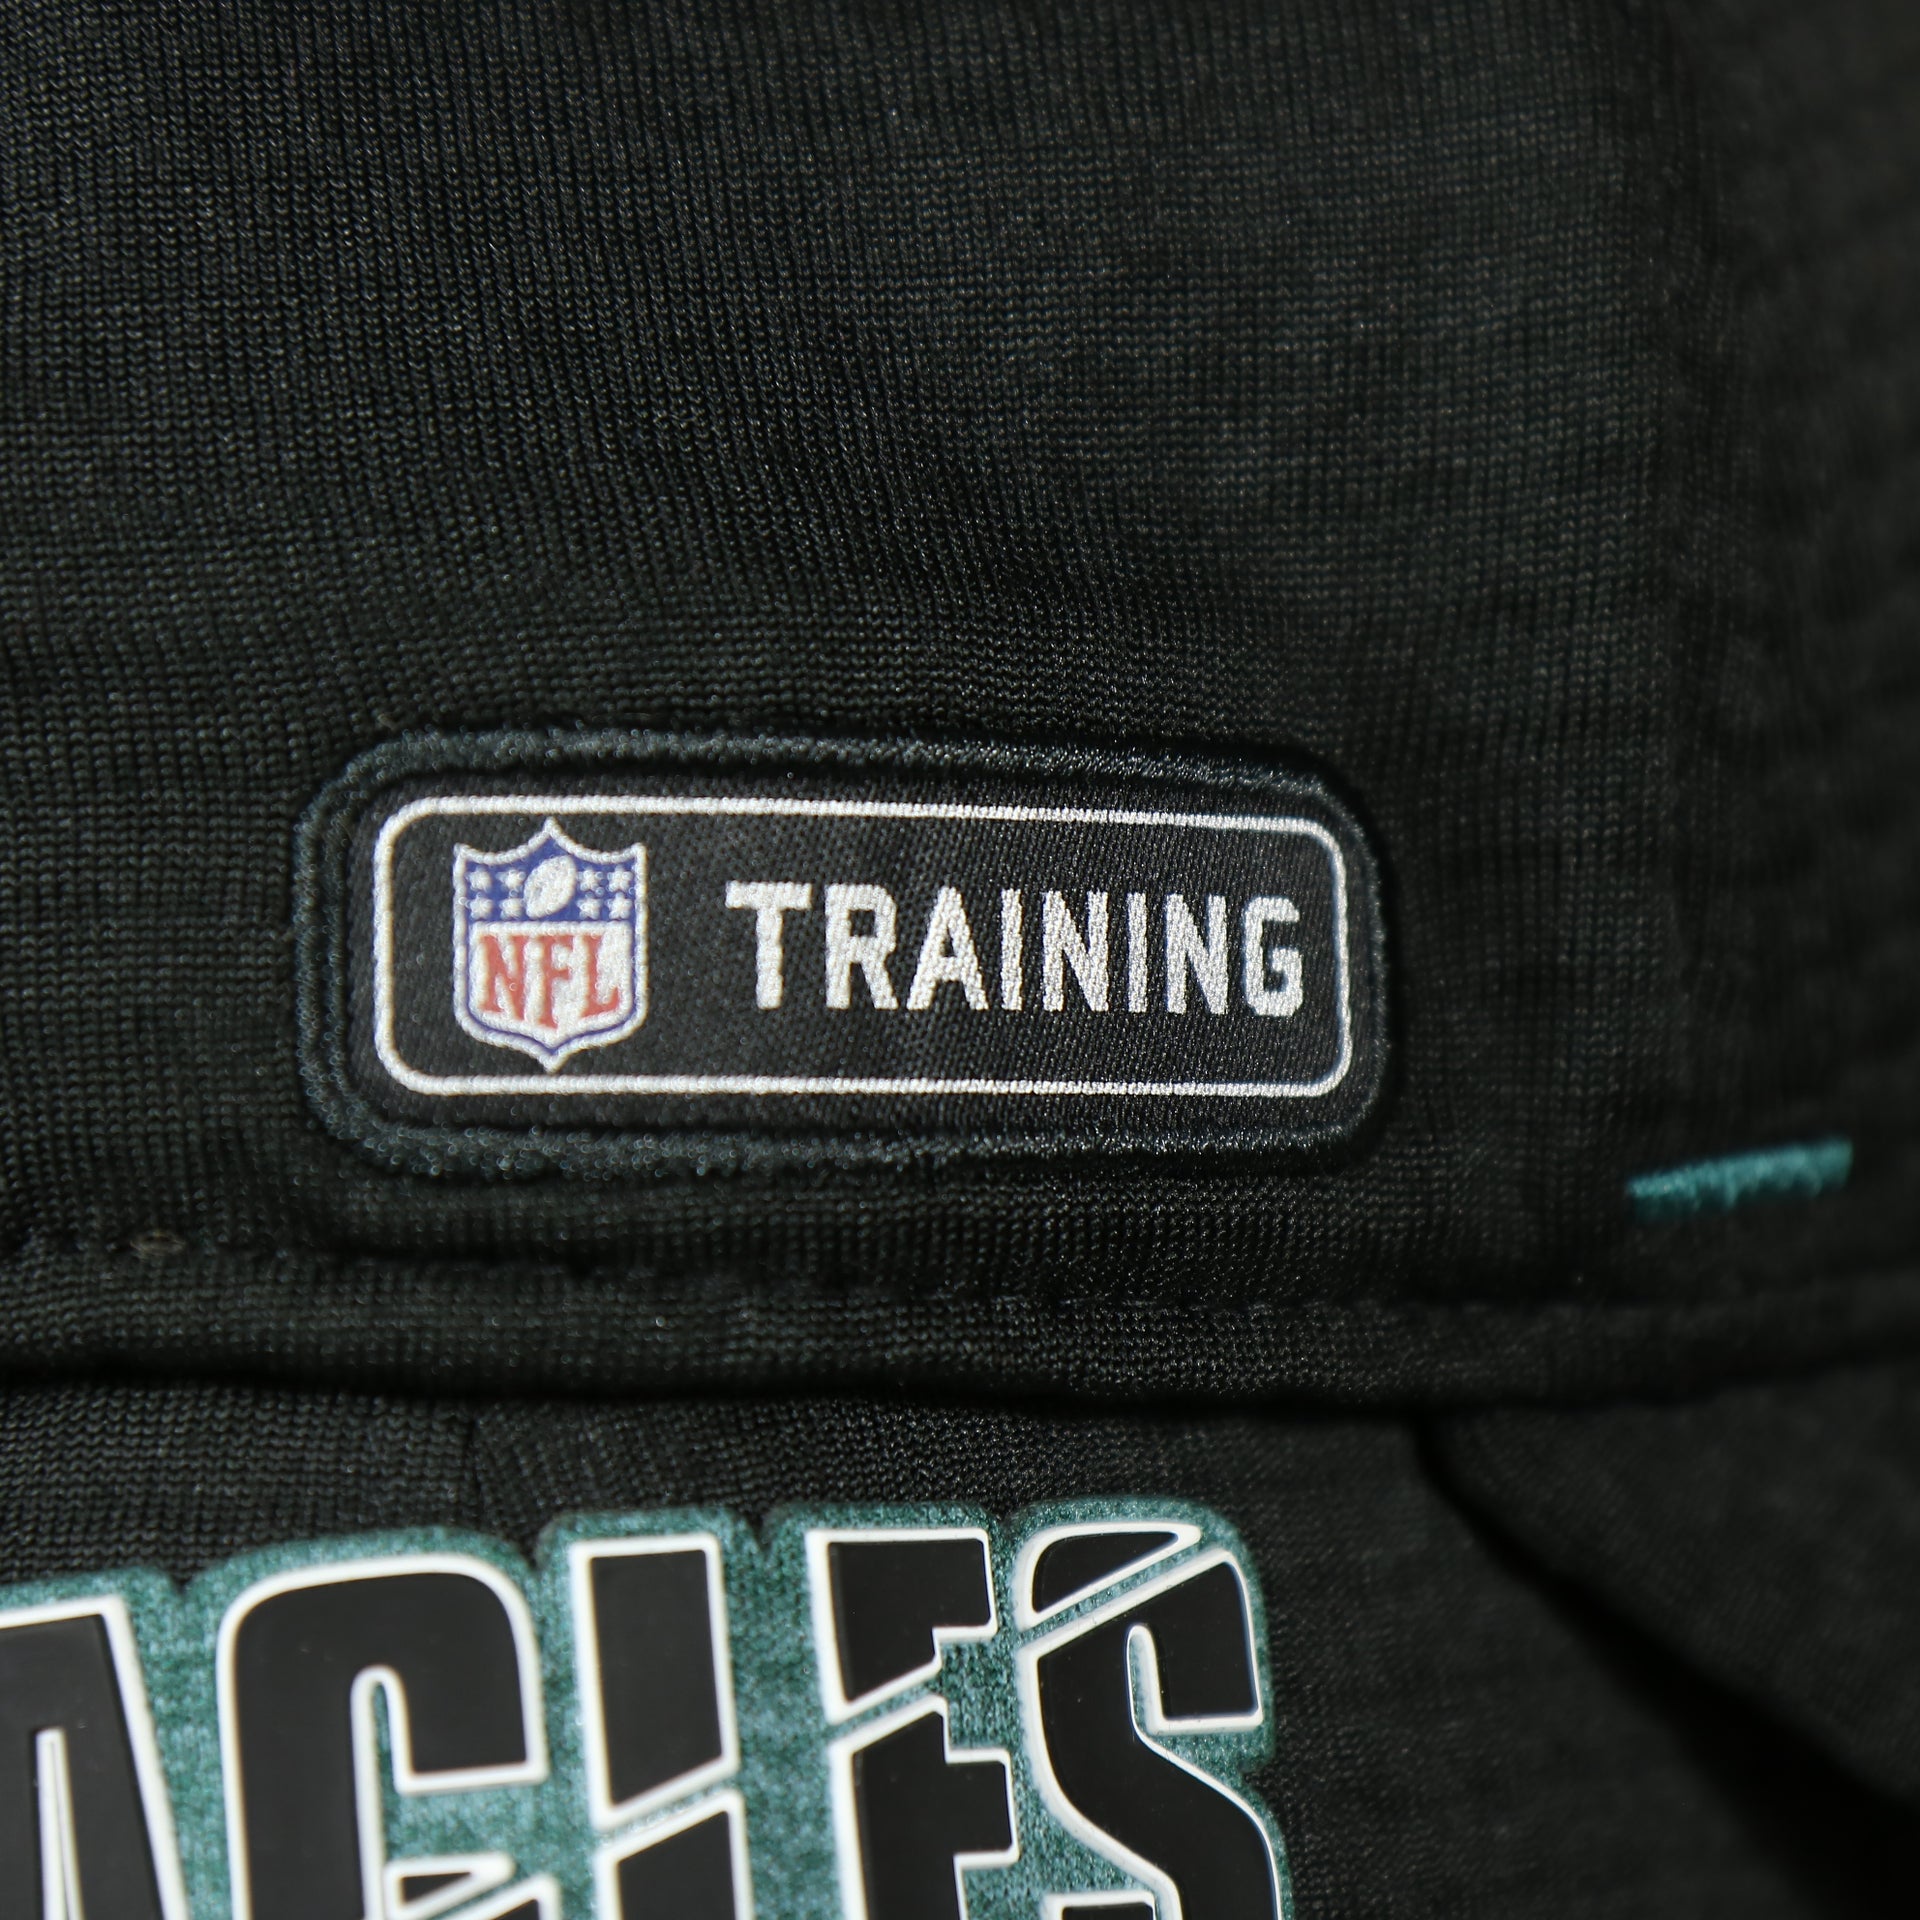 NFL training patch on the Eagles 2020 Training Camp Flexfit | Philadelphia Eagles 2020 On-Field Black Training Camp Stretch Fit